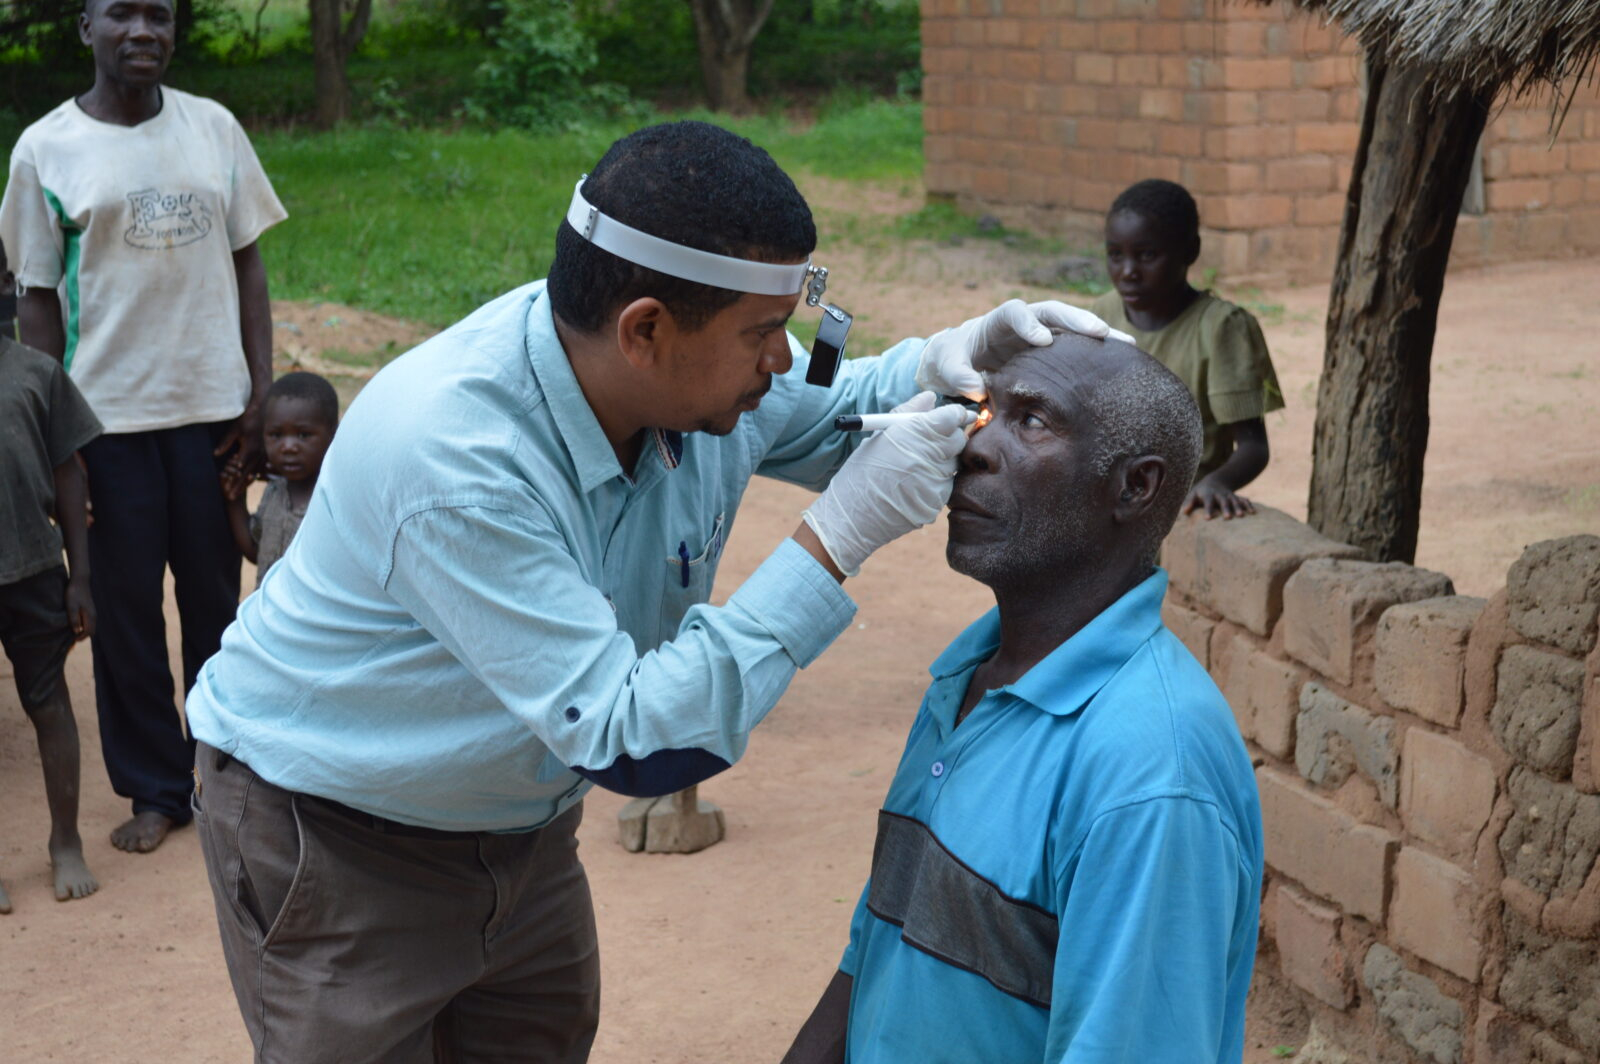 A man wearing a blue shirt and a face visor conducts an eye screening on another man. The man who is receiving the screening is wearing a blue t shirt and sitting down.